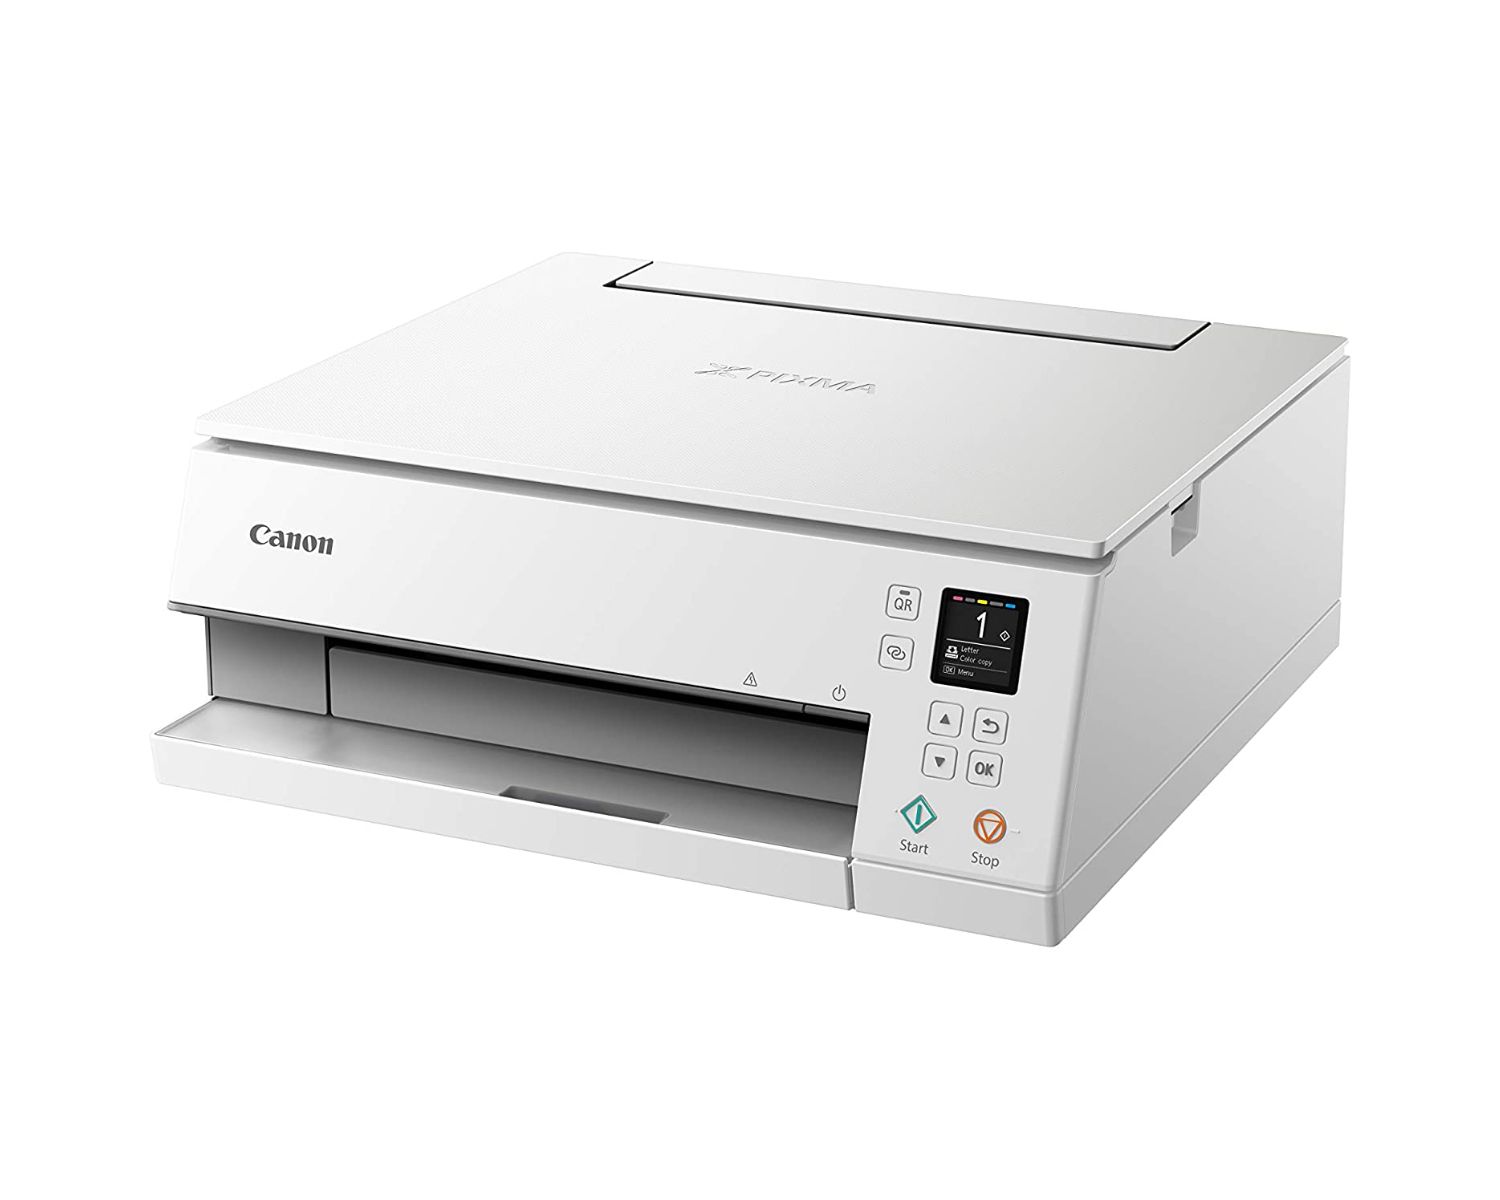 How To Connect Canon Printer To Computer Without Cd